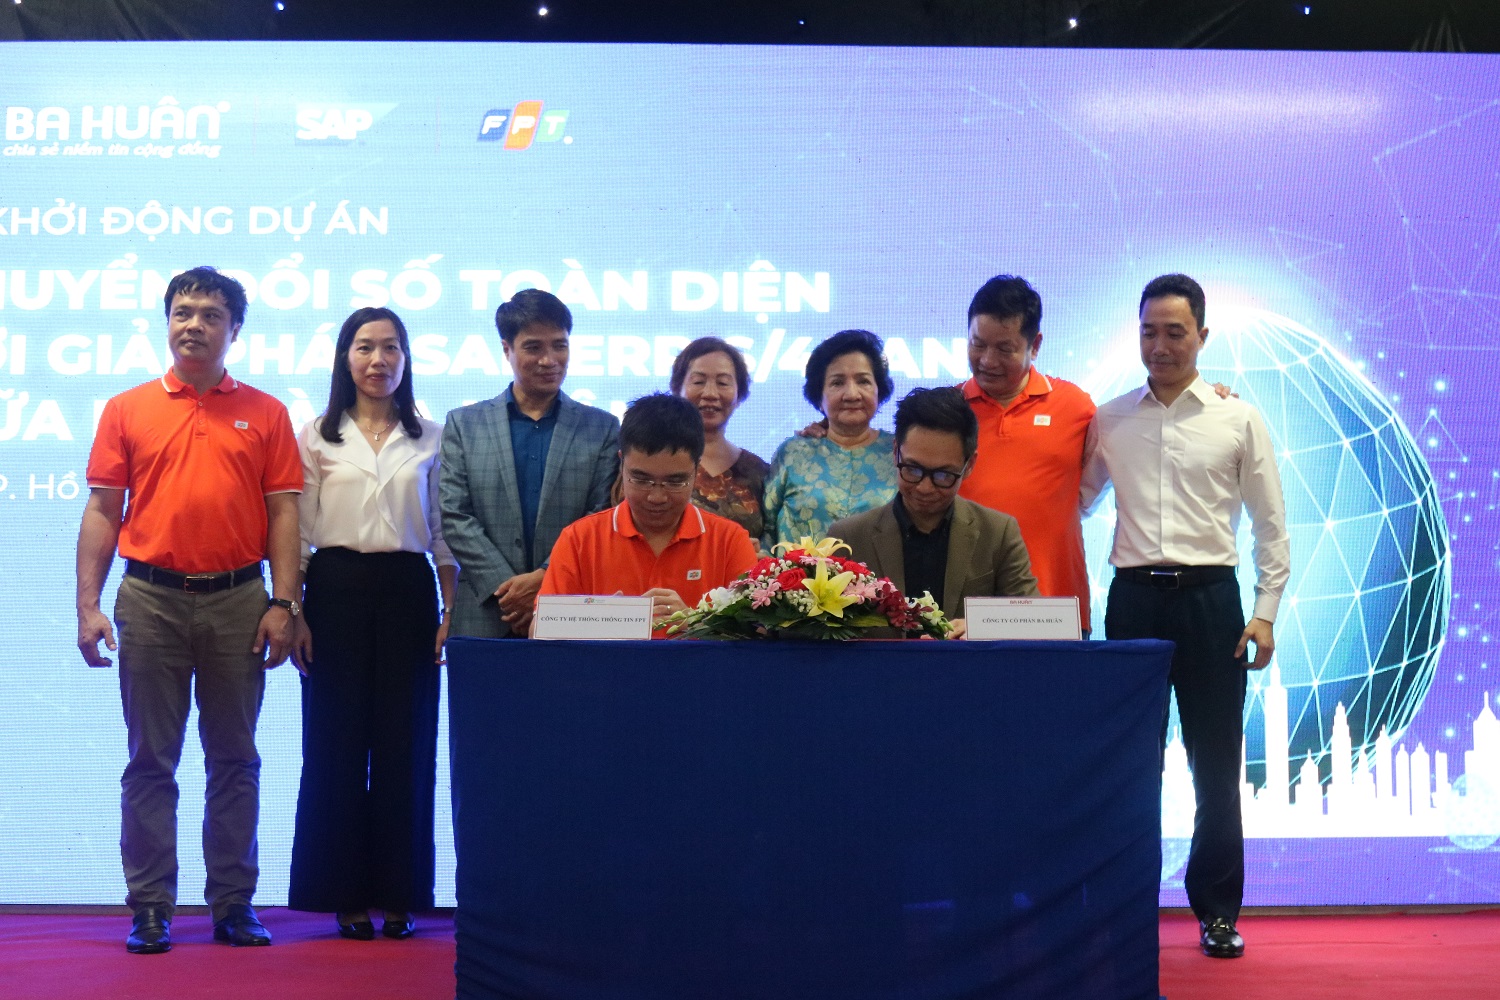 Mr. Nguyen Hoang Minh - CEO of FPT IS - represented FPT in signing the comprehensive digital transformation agreement with Mr. Tran Viet Hung - CEO of Ba Huan JSC.